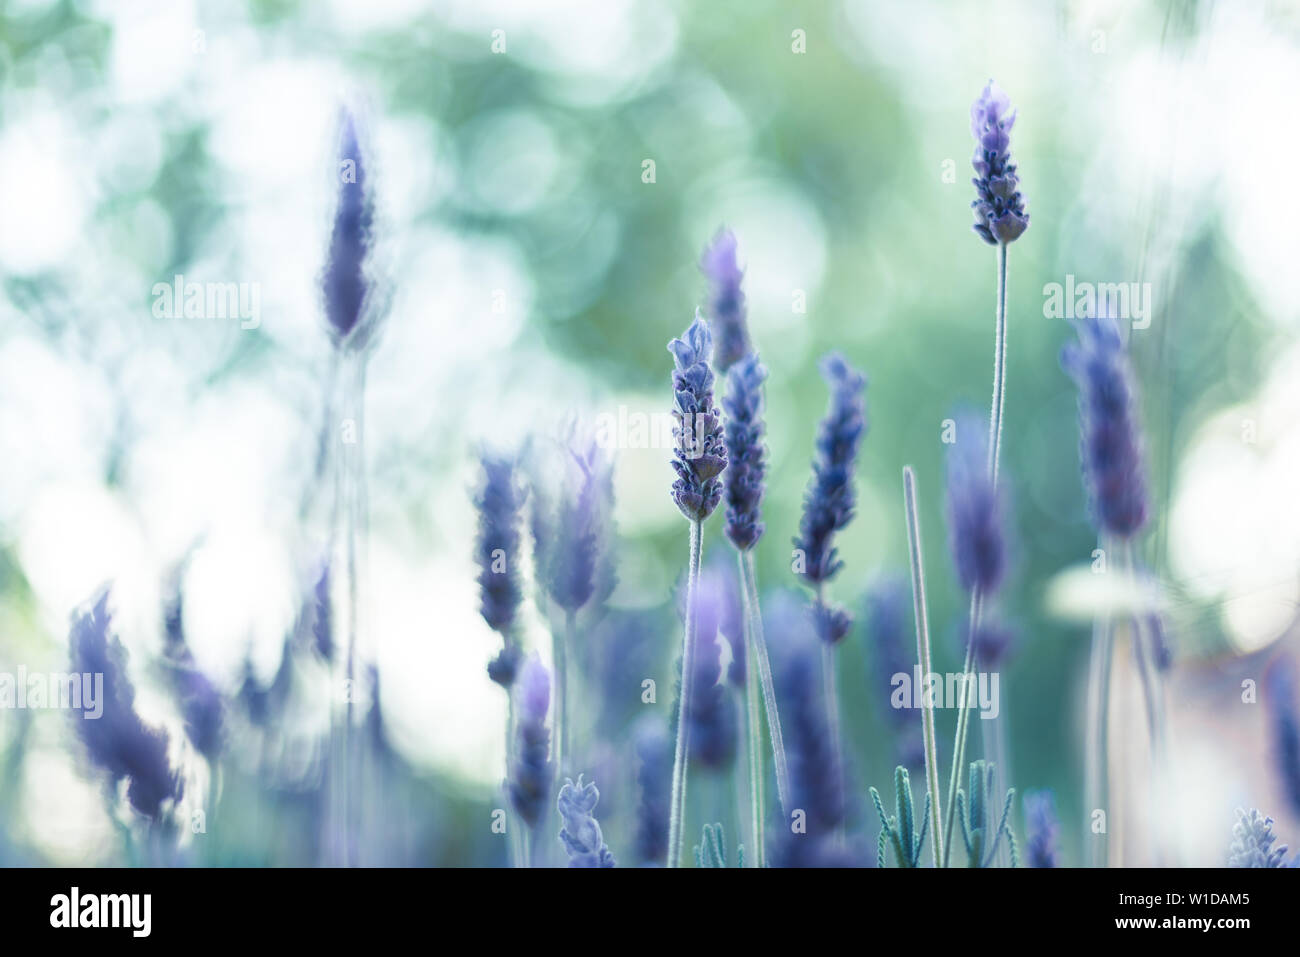 Lavender flowers in a shallow depth of field with beautiful bokeh, melting the sunlight, the green background and purple lavender flowers together. Stock Photo